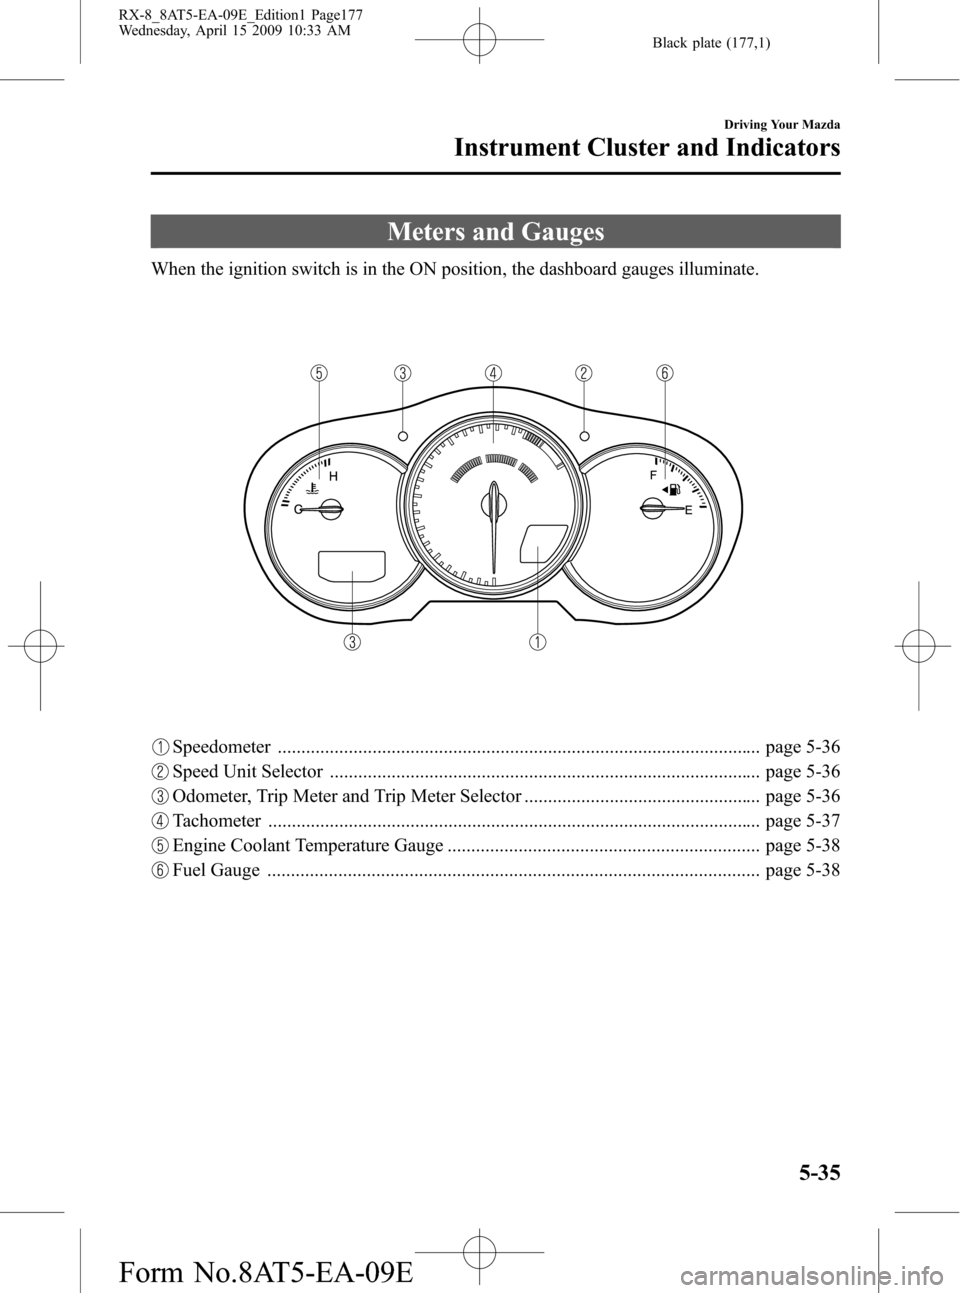 MAZDA MODEL RX 8 2010  Owners Manual (in English) Black plate (177,1)
Meters and Gauges
When the ignition switch is in the ON position, the dashboard gauges illuminate.
Speedometer .....................................................................